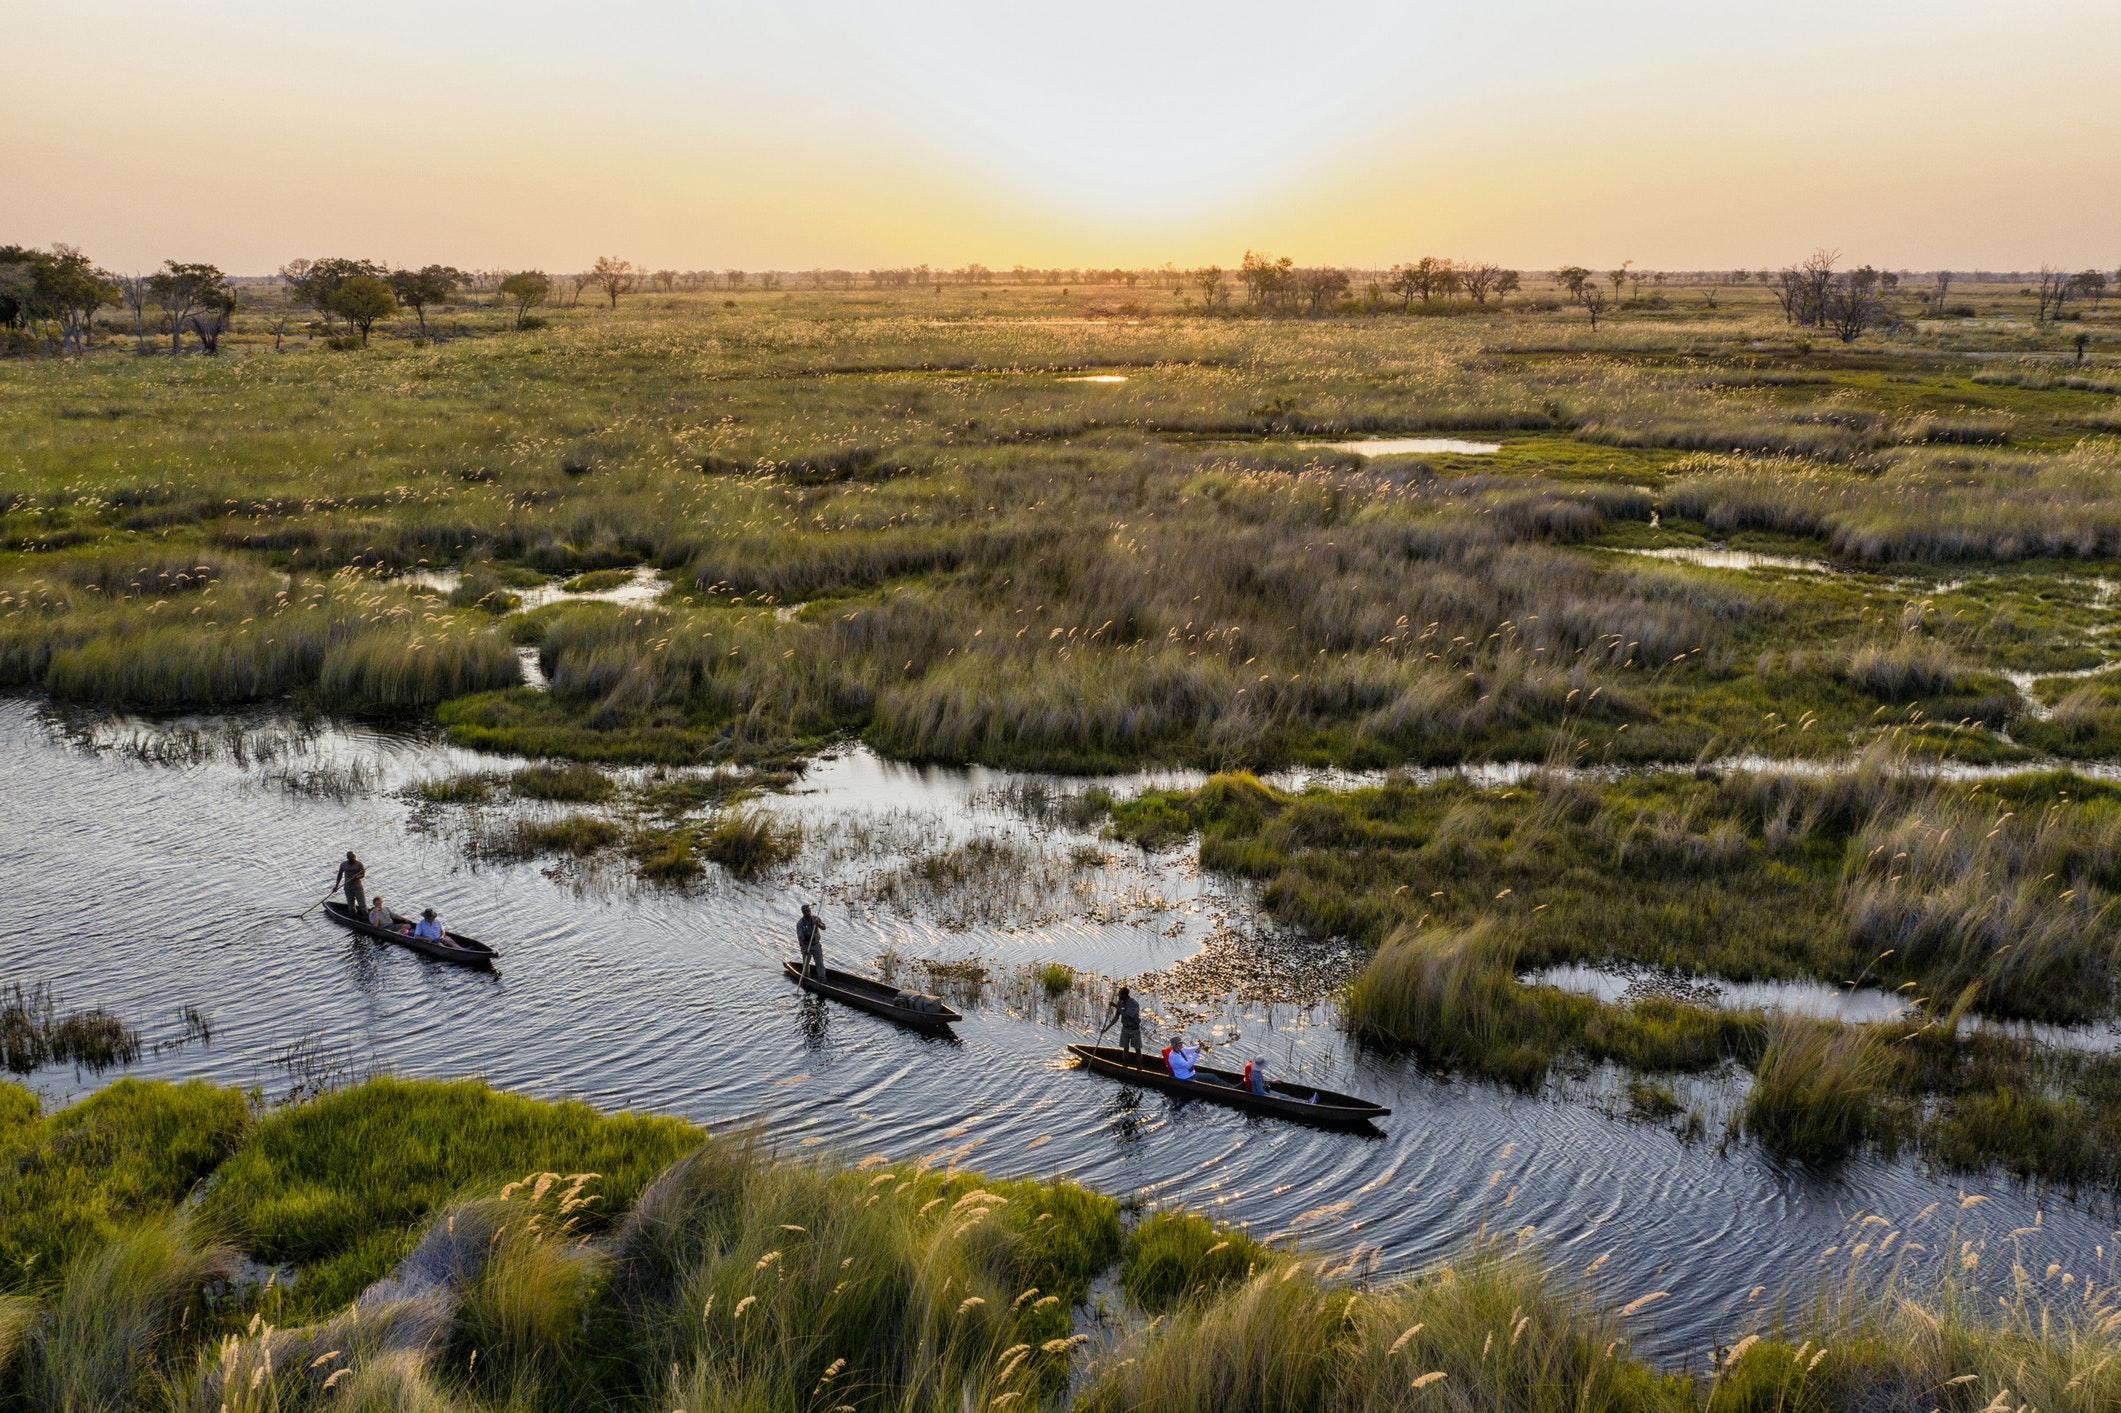 Visitors in mokoro canoes on are paddled along in a flooded grassland 